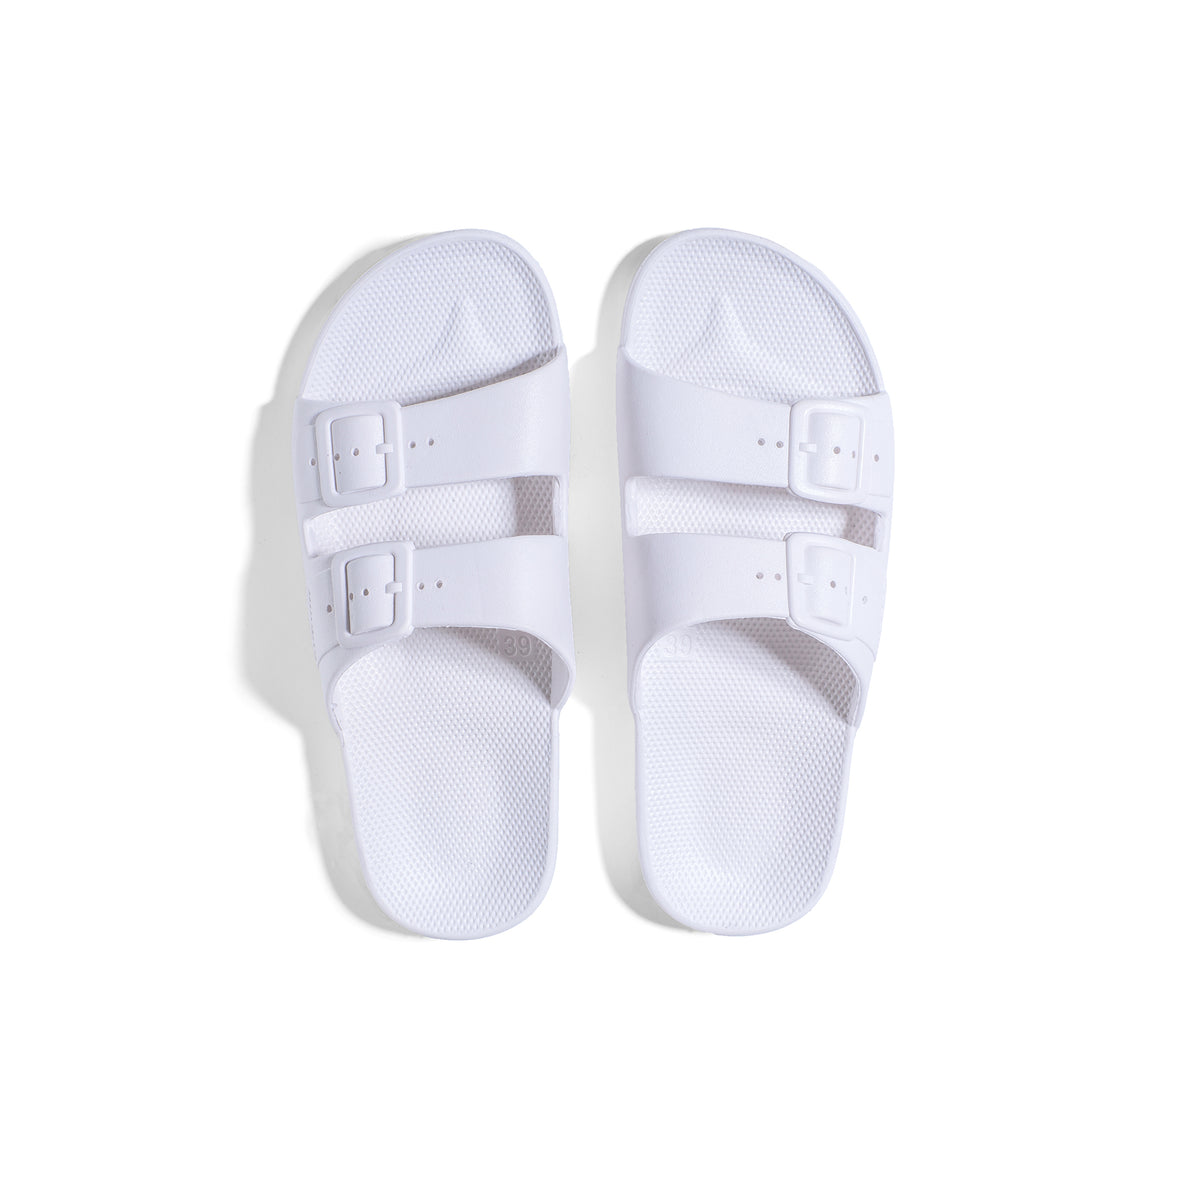 Parallel Culture Shoes and Fashion Online SLIDES FREEDOM MOSES FREEDOM MOSES SOLIDS